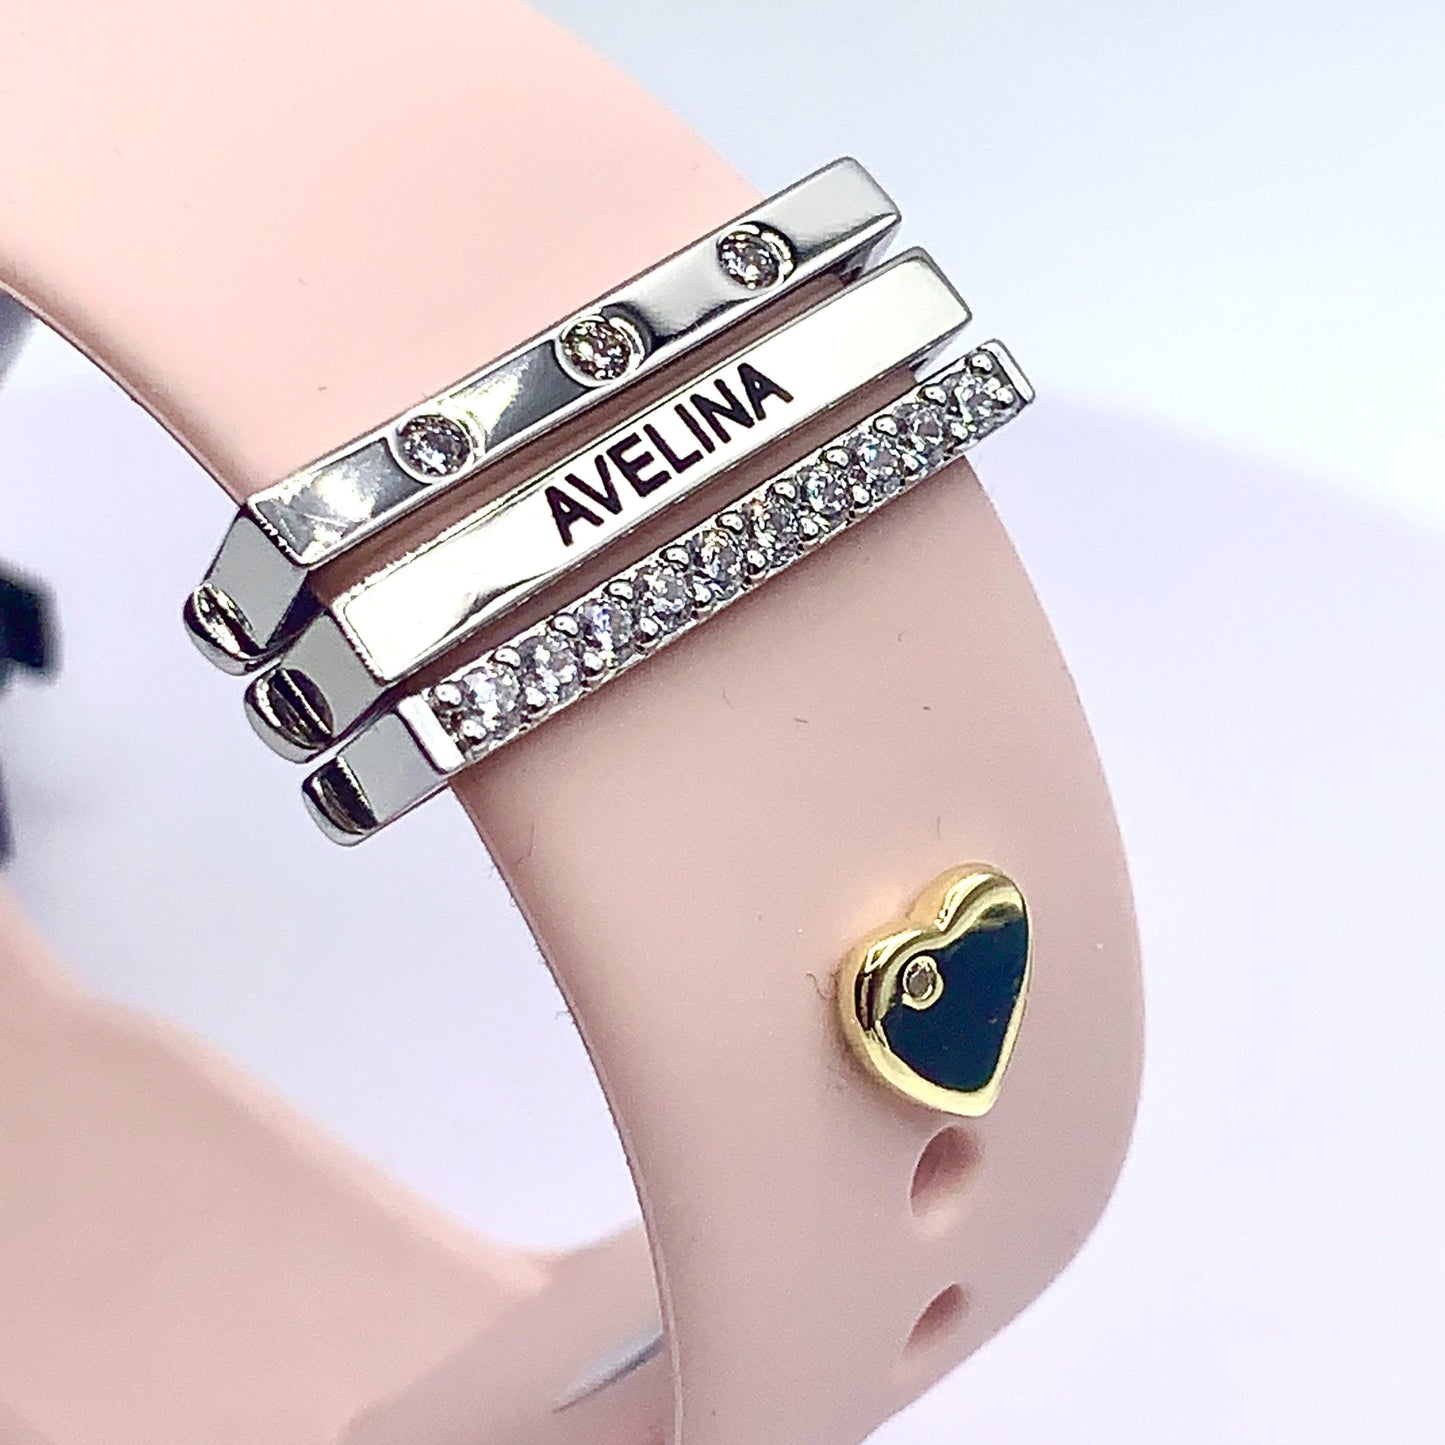  Close-up of a pink Apple Watch band with personalized silver and diamond-like engraved charms featuring the name "Avelina" and a gold heart accent.